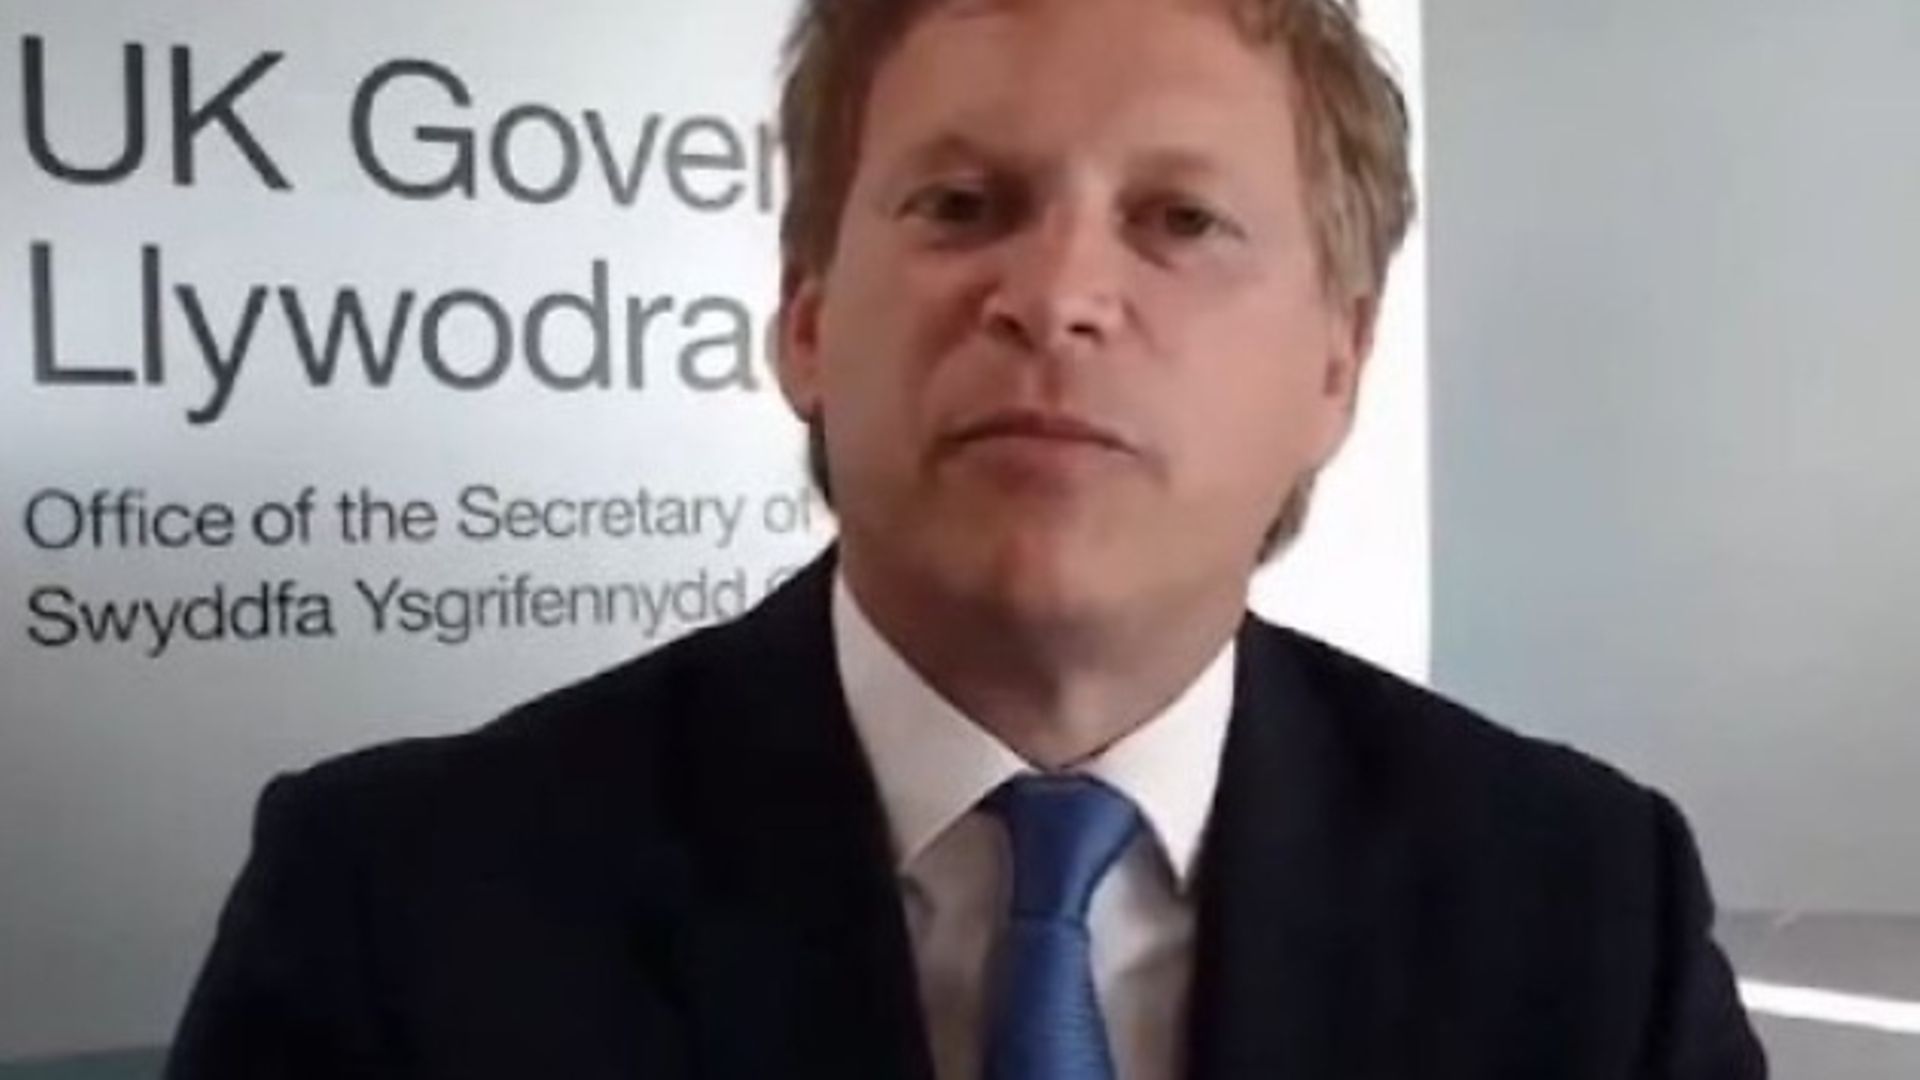 Transport minister Grant Shapps. Photograph: BBC/Twitter